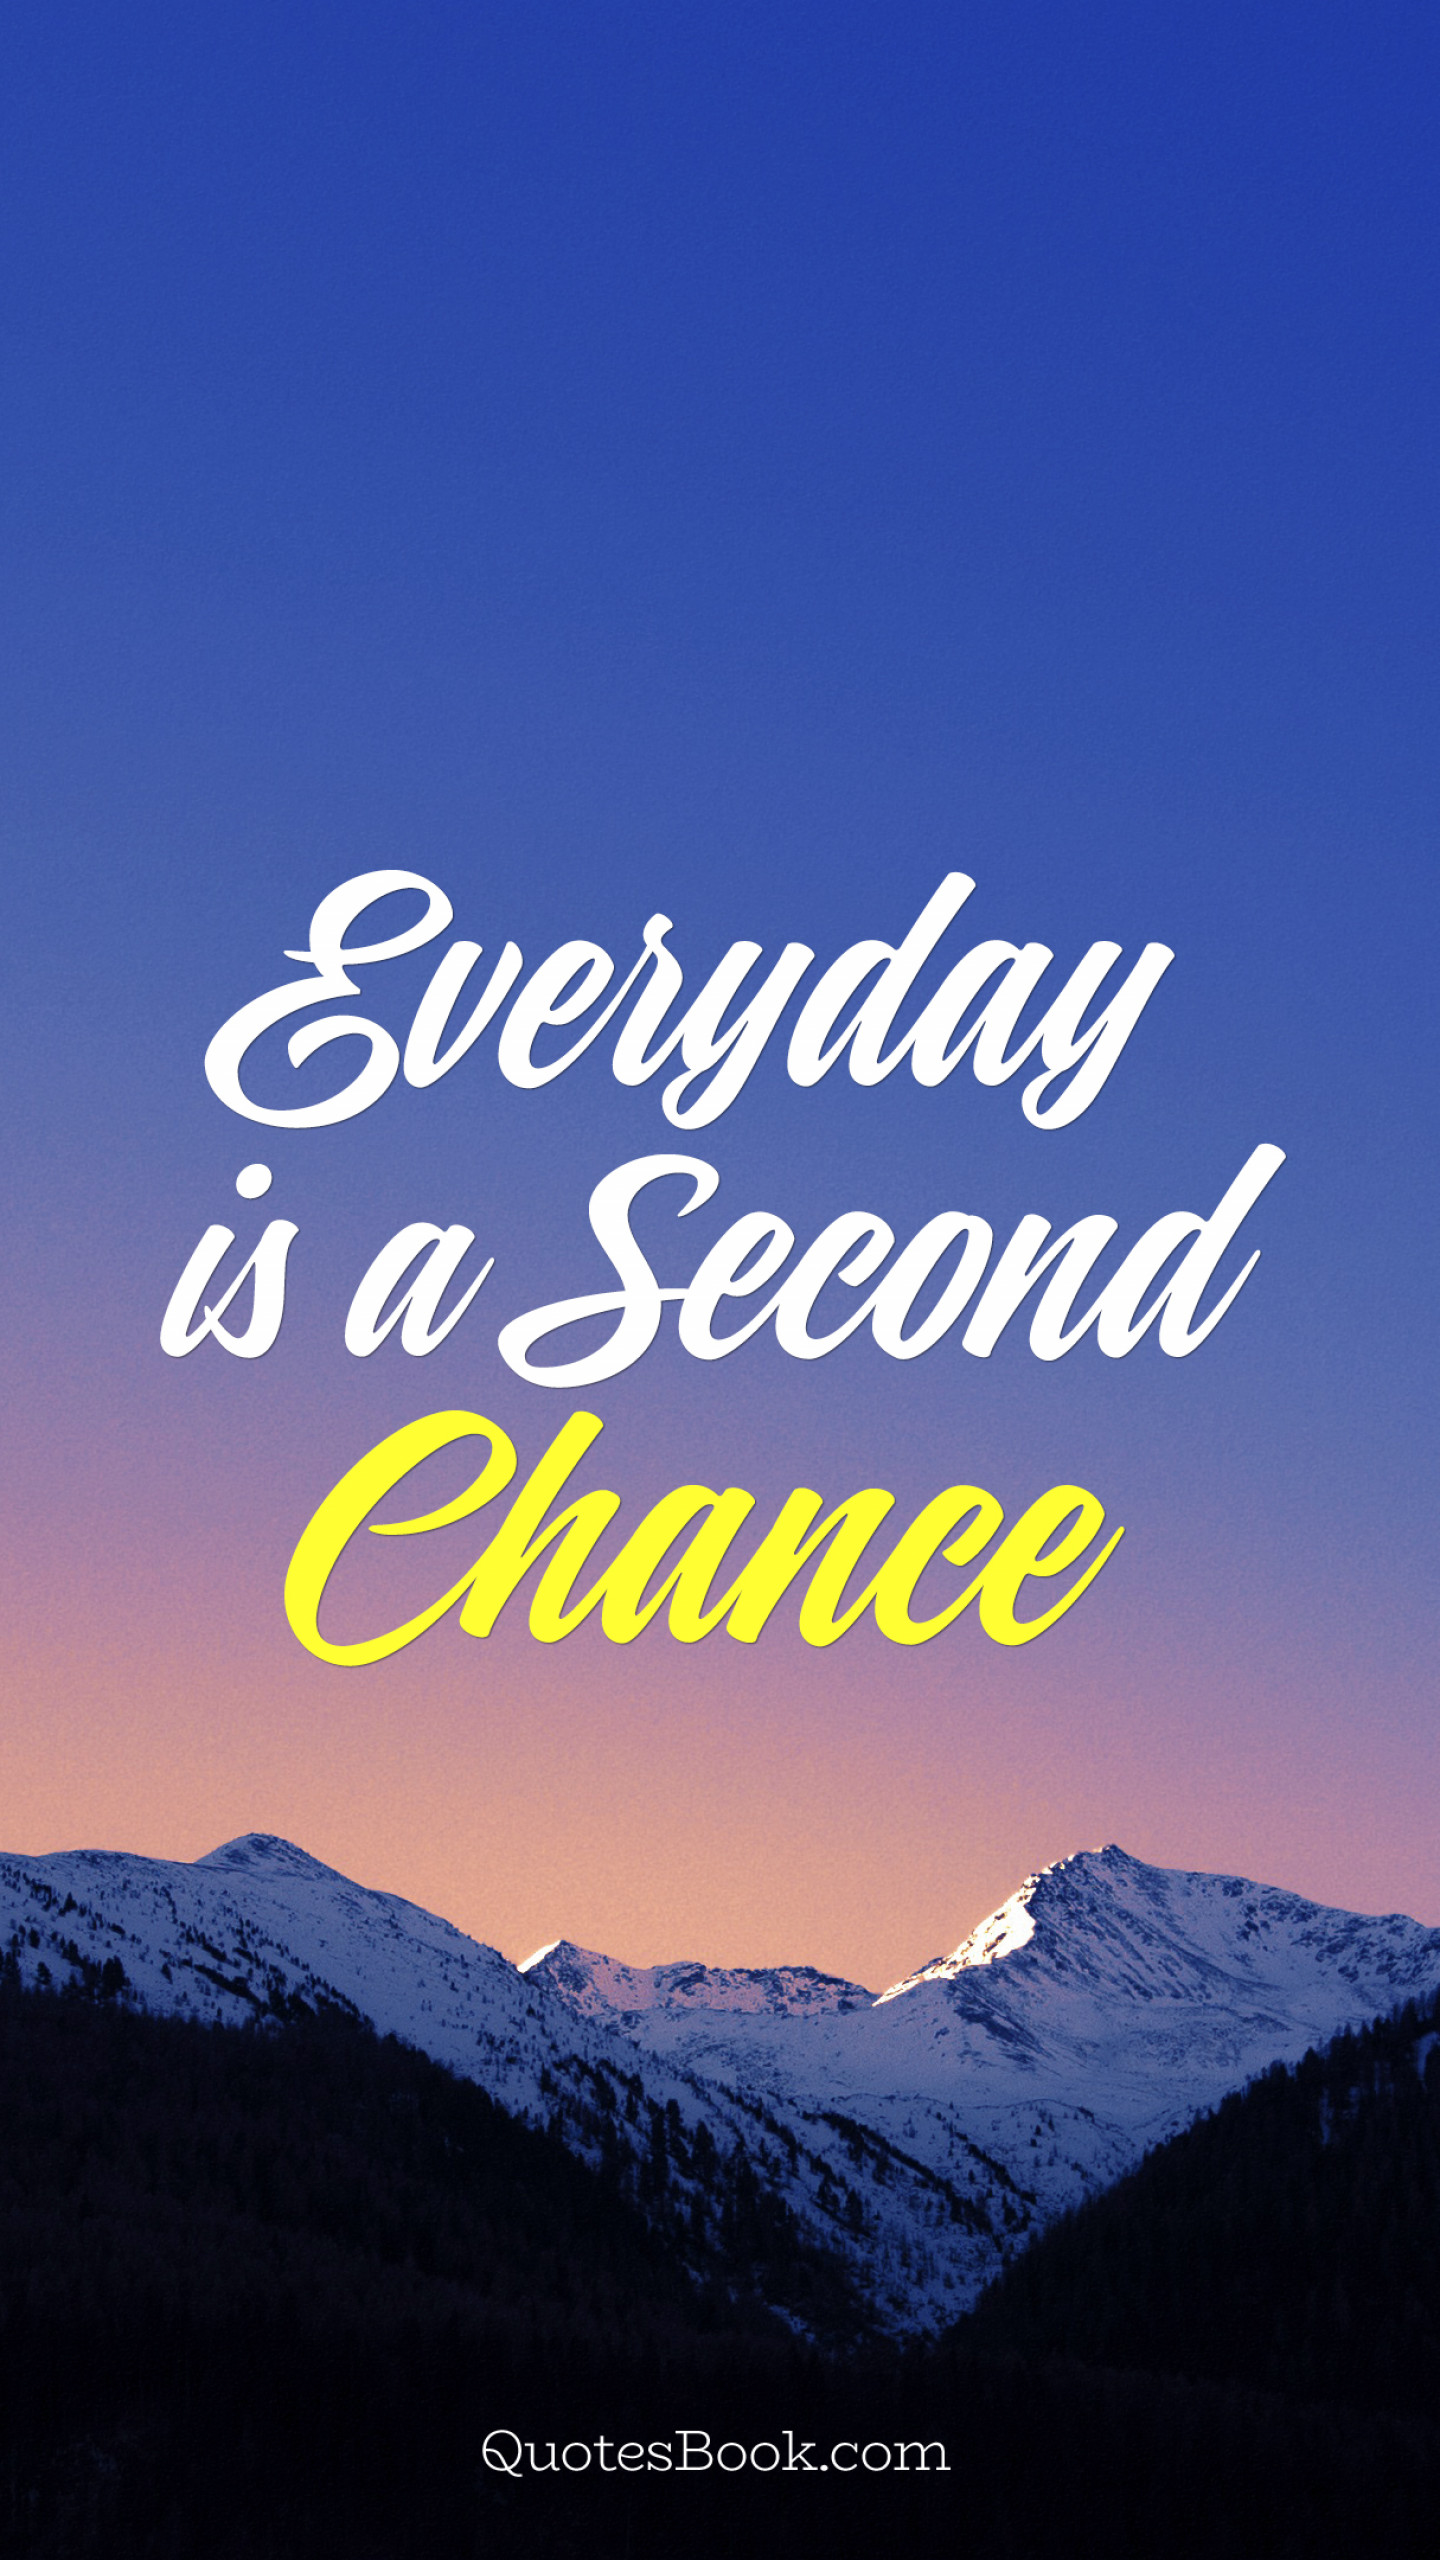 Everyday is a Second Chance - QuotesBook